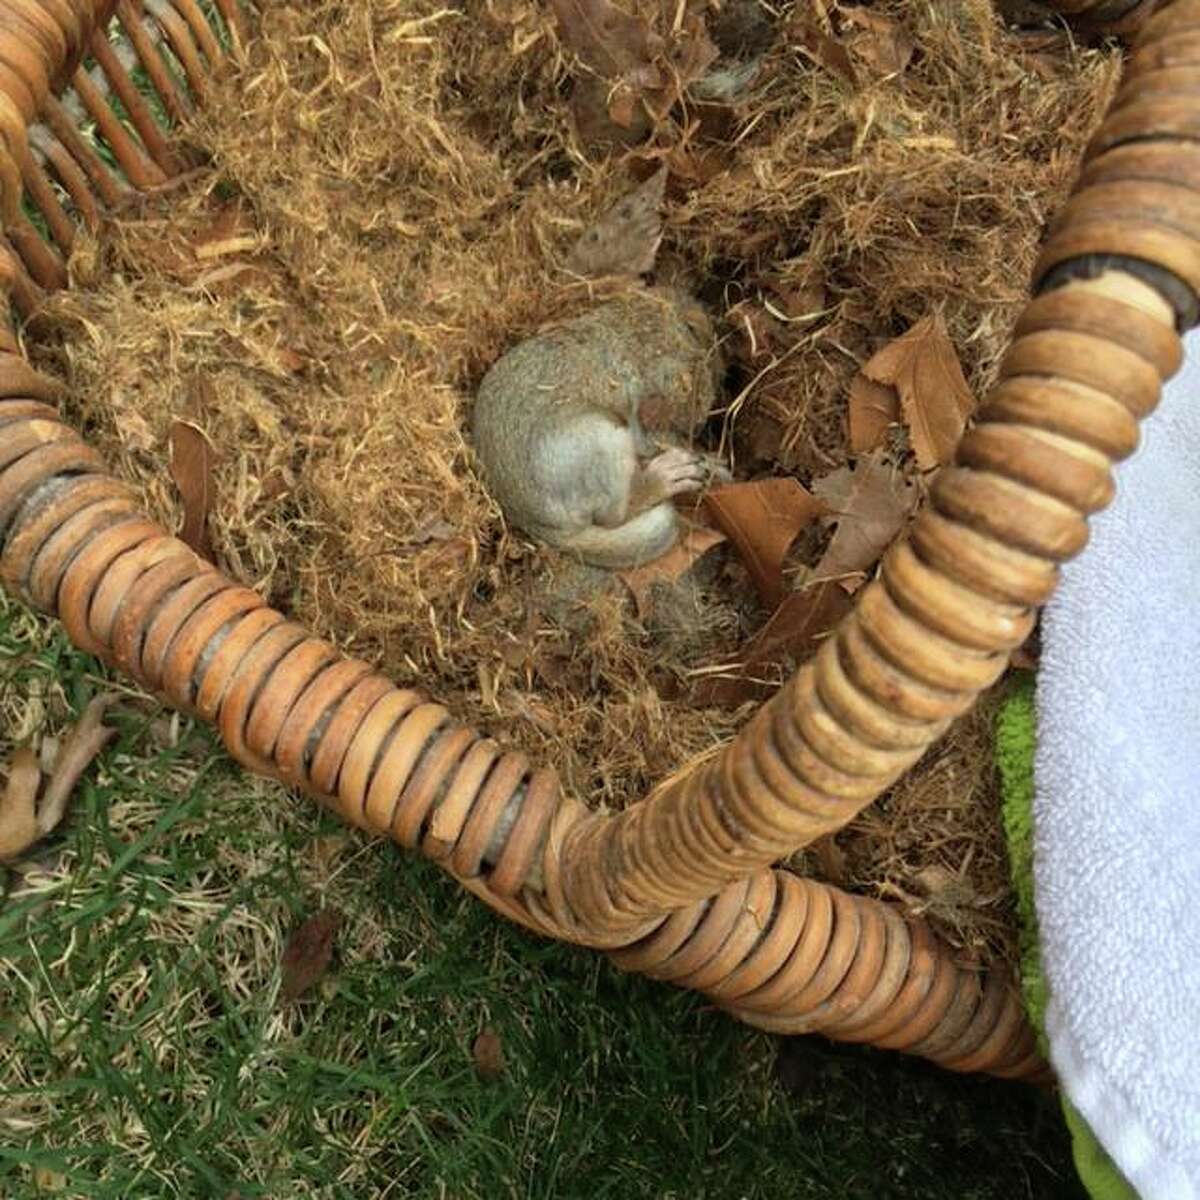 One of the baby squirrels that was found Saturday on Puritan Road.